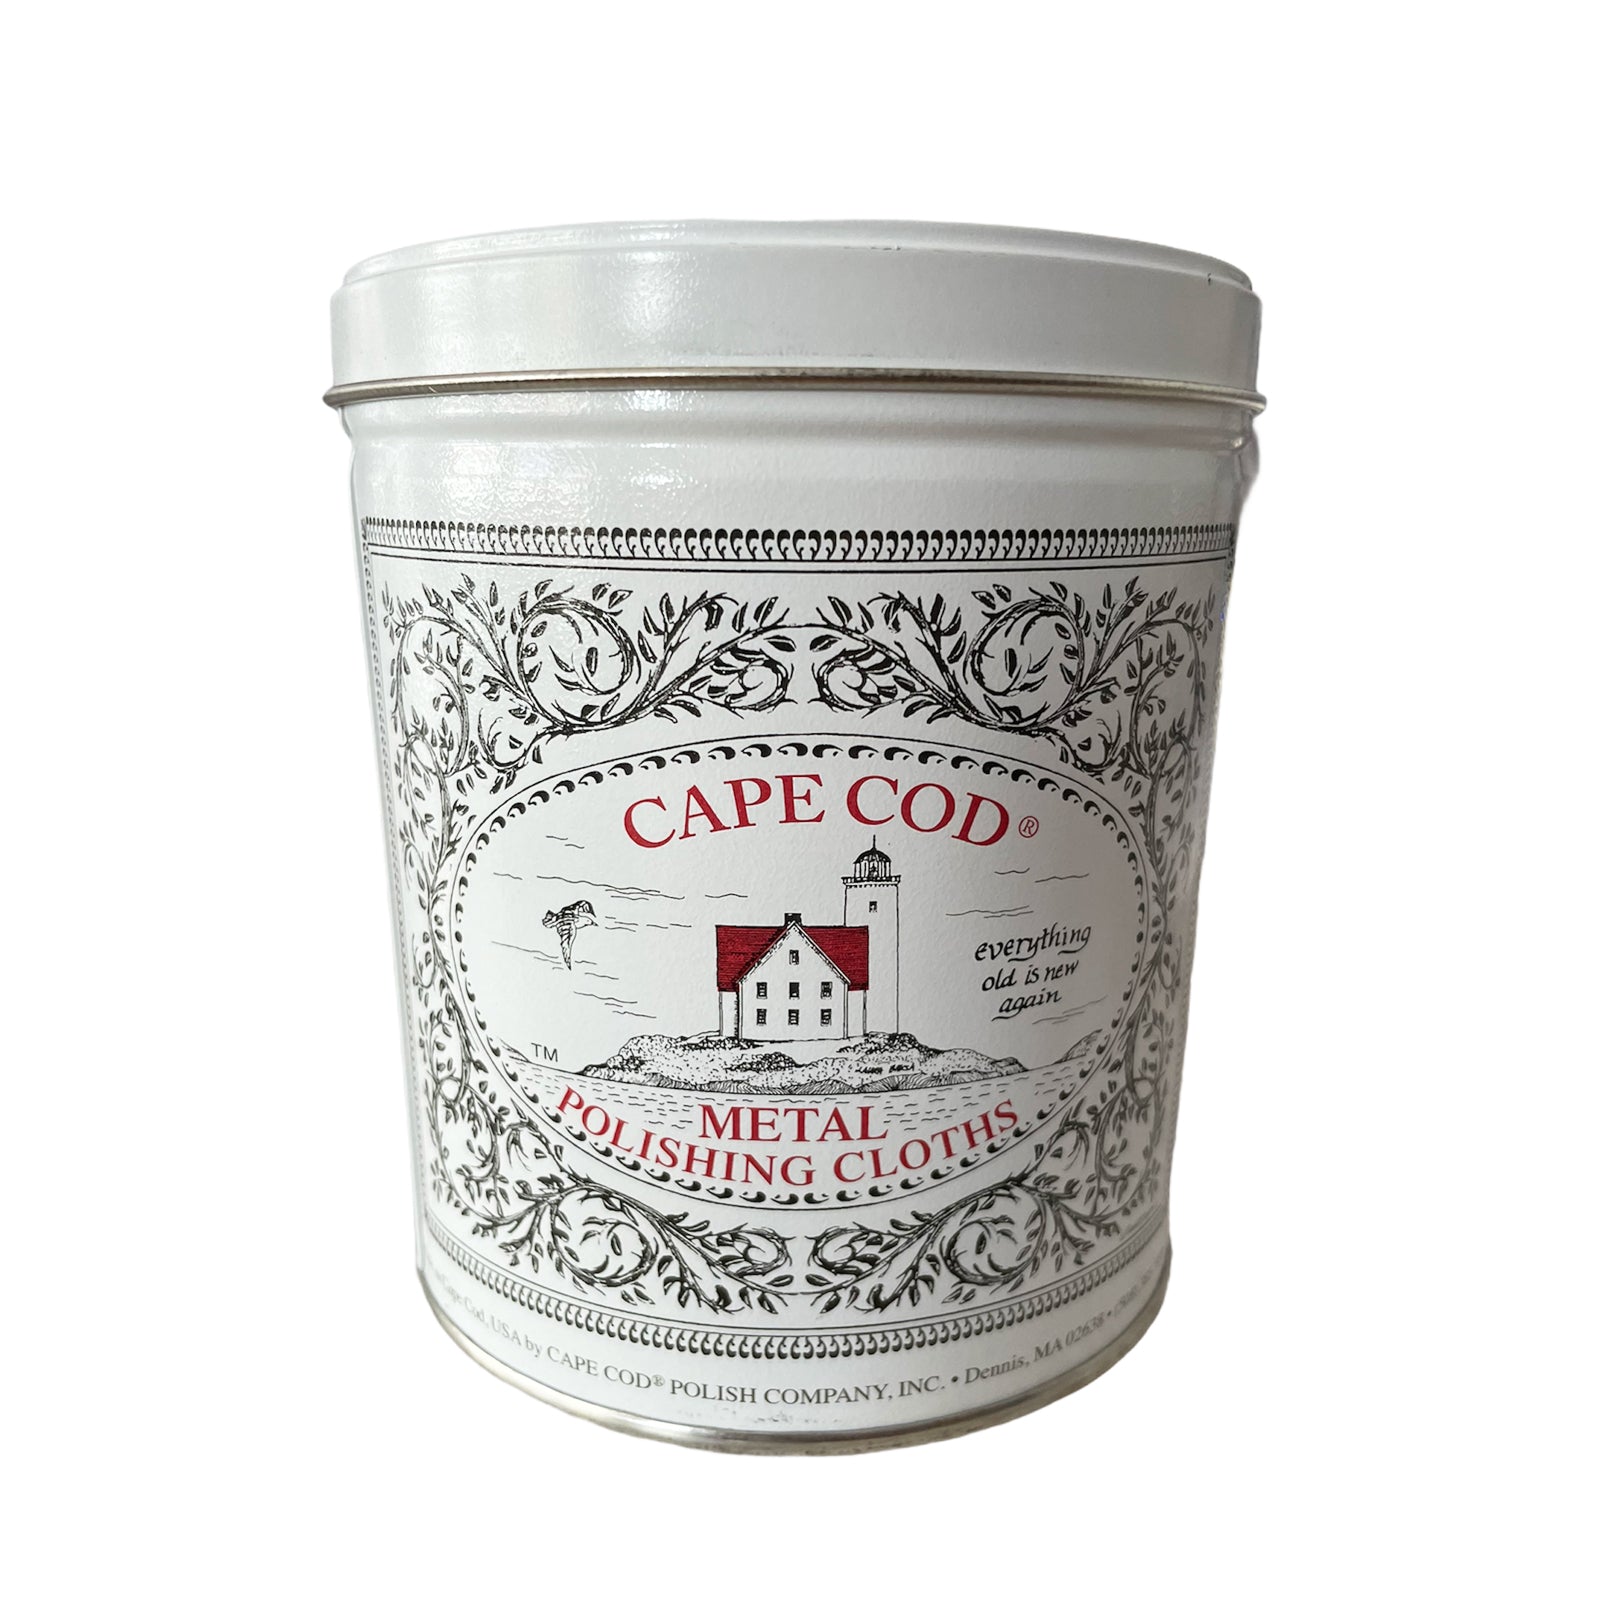 Cape Cod Polishing Cloths for Fine Metals, Jewelry Cleaner and Tarnish  Remover, Silver Polishing to a Brilliant Shine